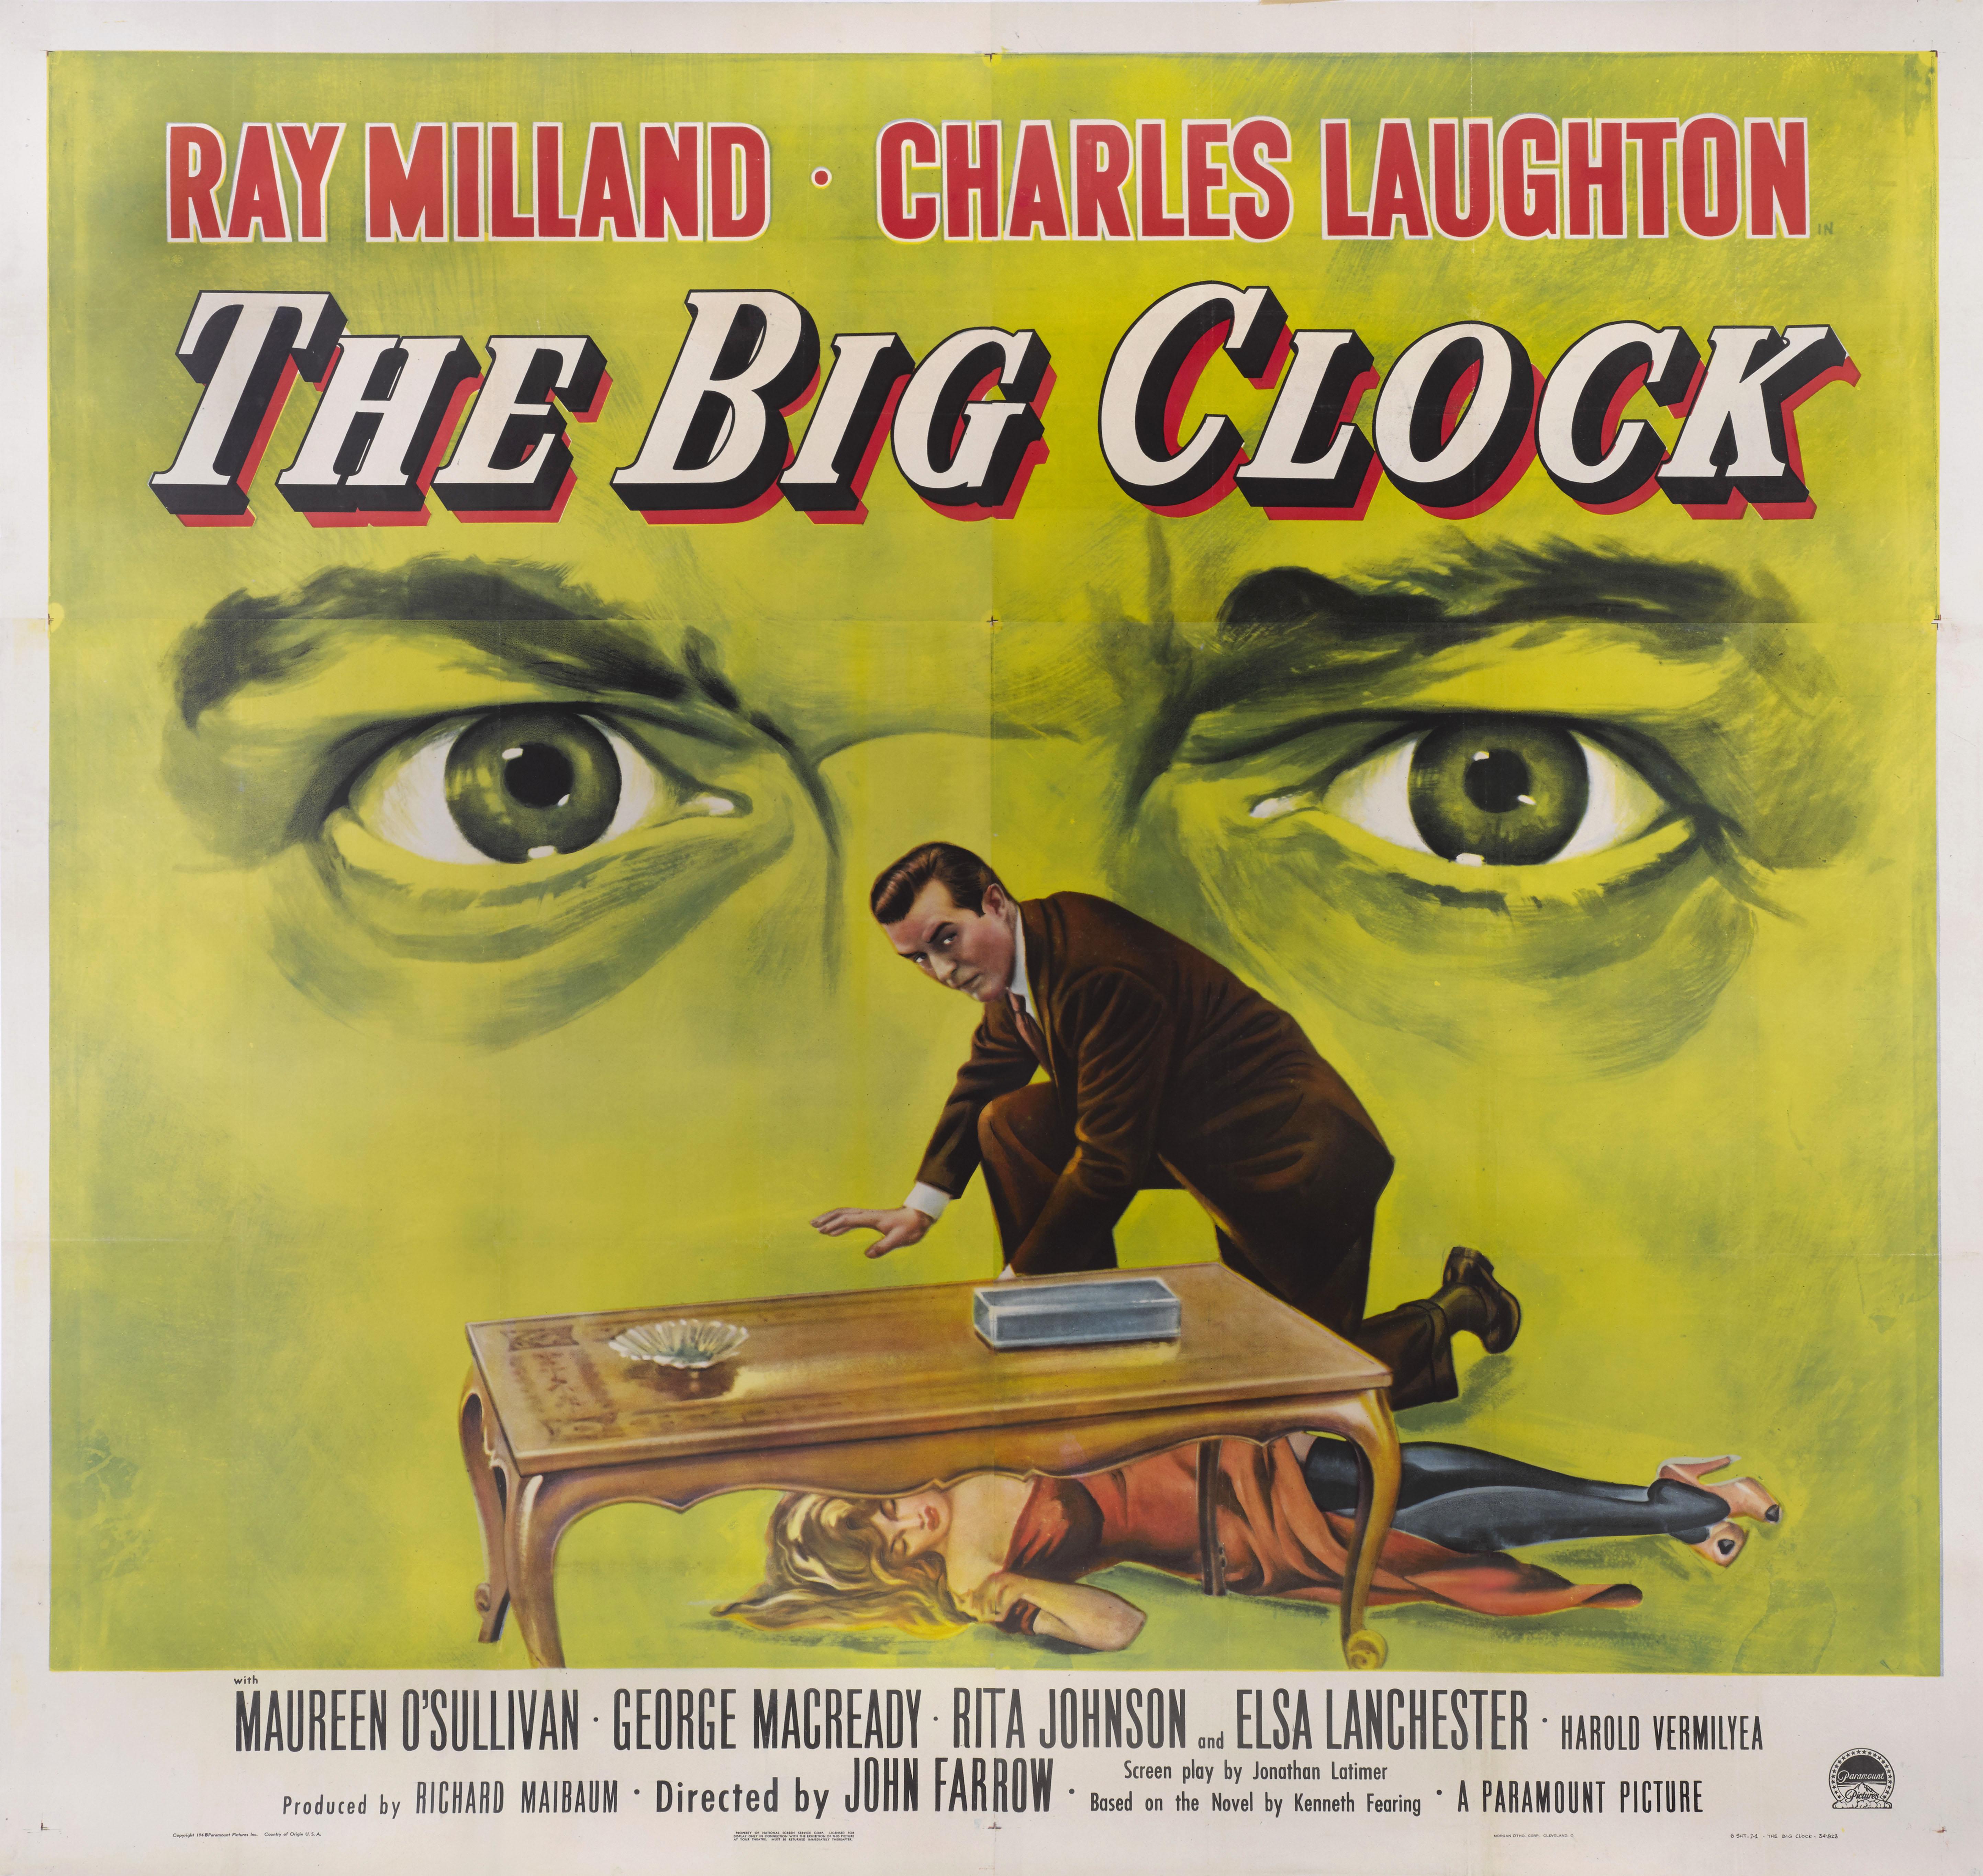 Original American film poster for the 1948 Film Noir The Big Clock.
This exceptionally rare poster was printed in 4 sheets and designed to be pasted onto billboards, therefore only unused examples survived. This film was directed by John